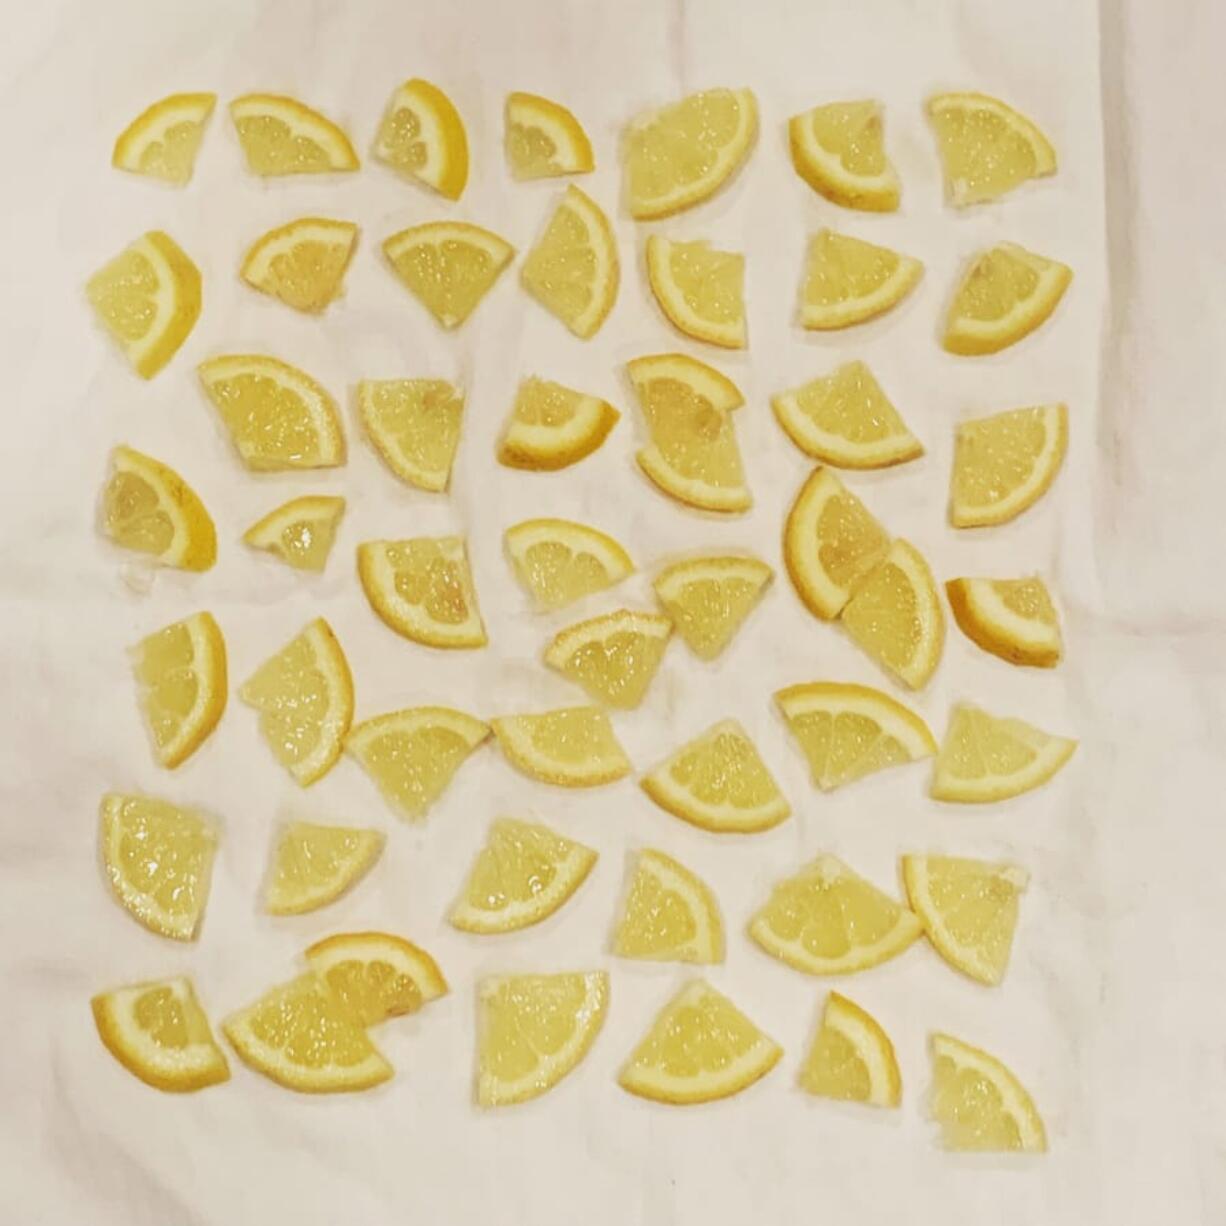 Use citrus fragrances in the bathroom, or toss a lemon down the garbage disposal. This photograph by Catherine Haley Epstein was part of the &quot;50 Days 50 Choices&quot; project and exhibit, featured at Pushdot Studios in Portland and the NIAD Center in Richmond, Calif., commemorating the victims of the 2016 Pulse Nightclub shooting in Orlando, Fla.